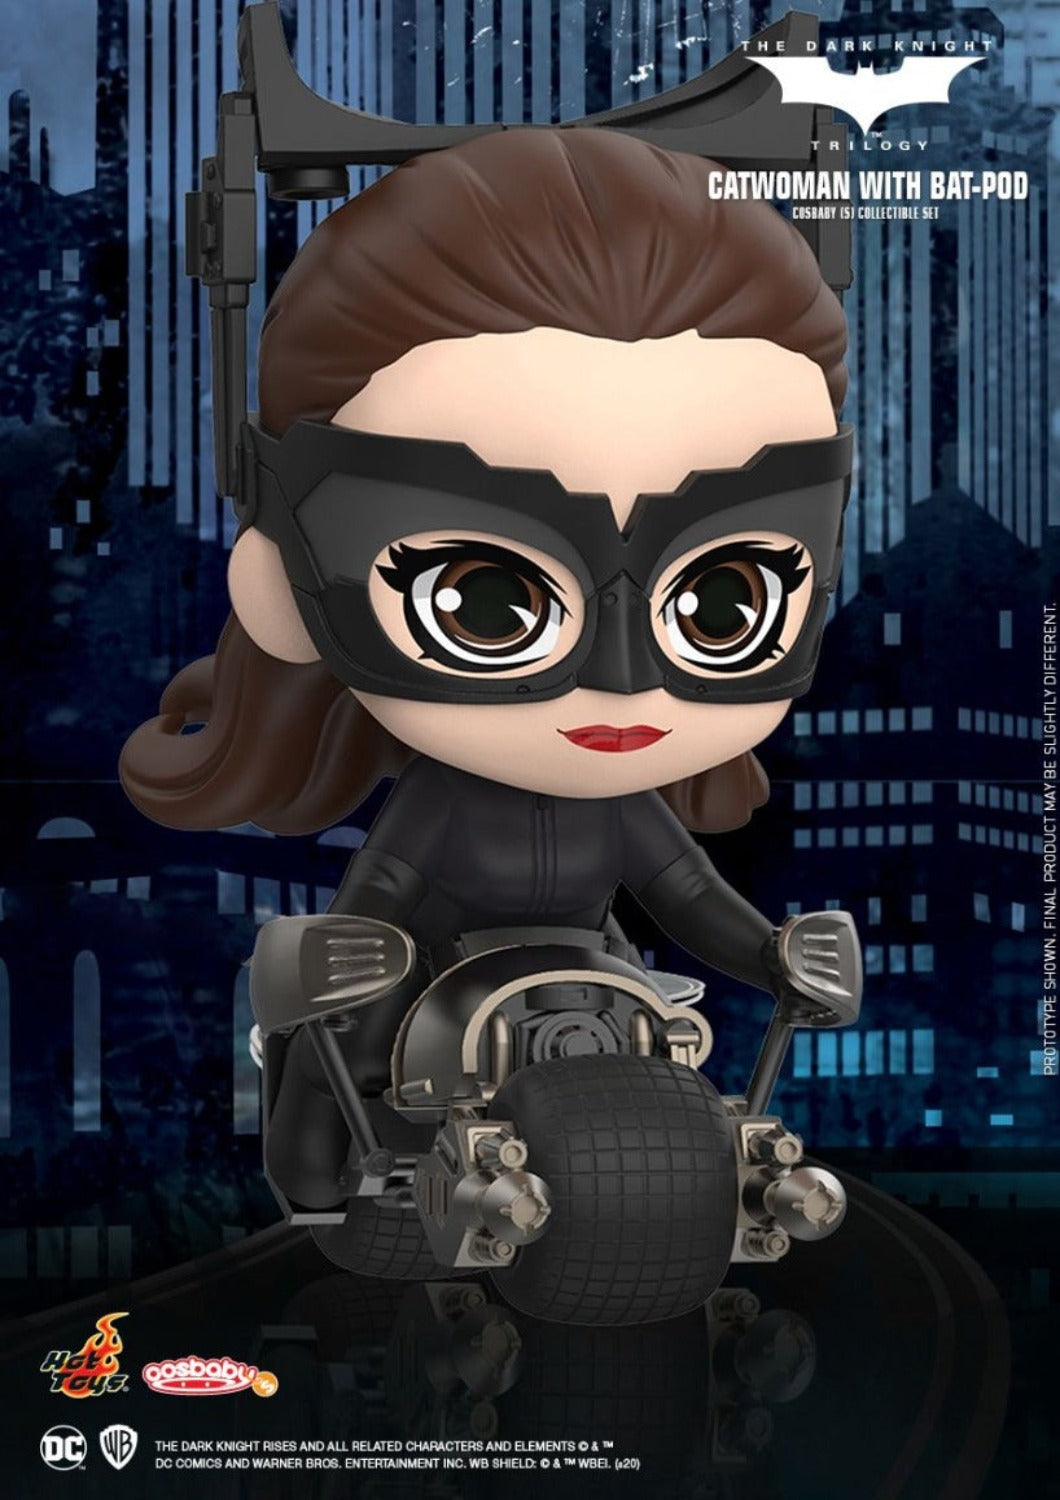 CATWOMAN WITH BAT-POD